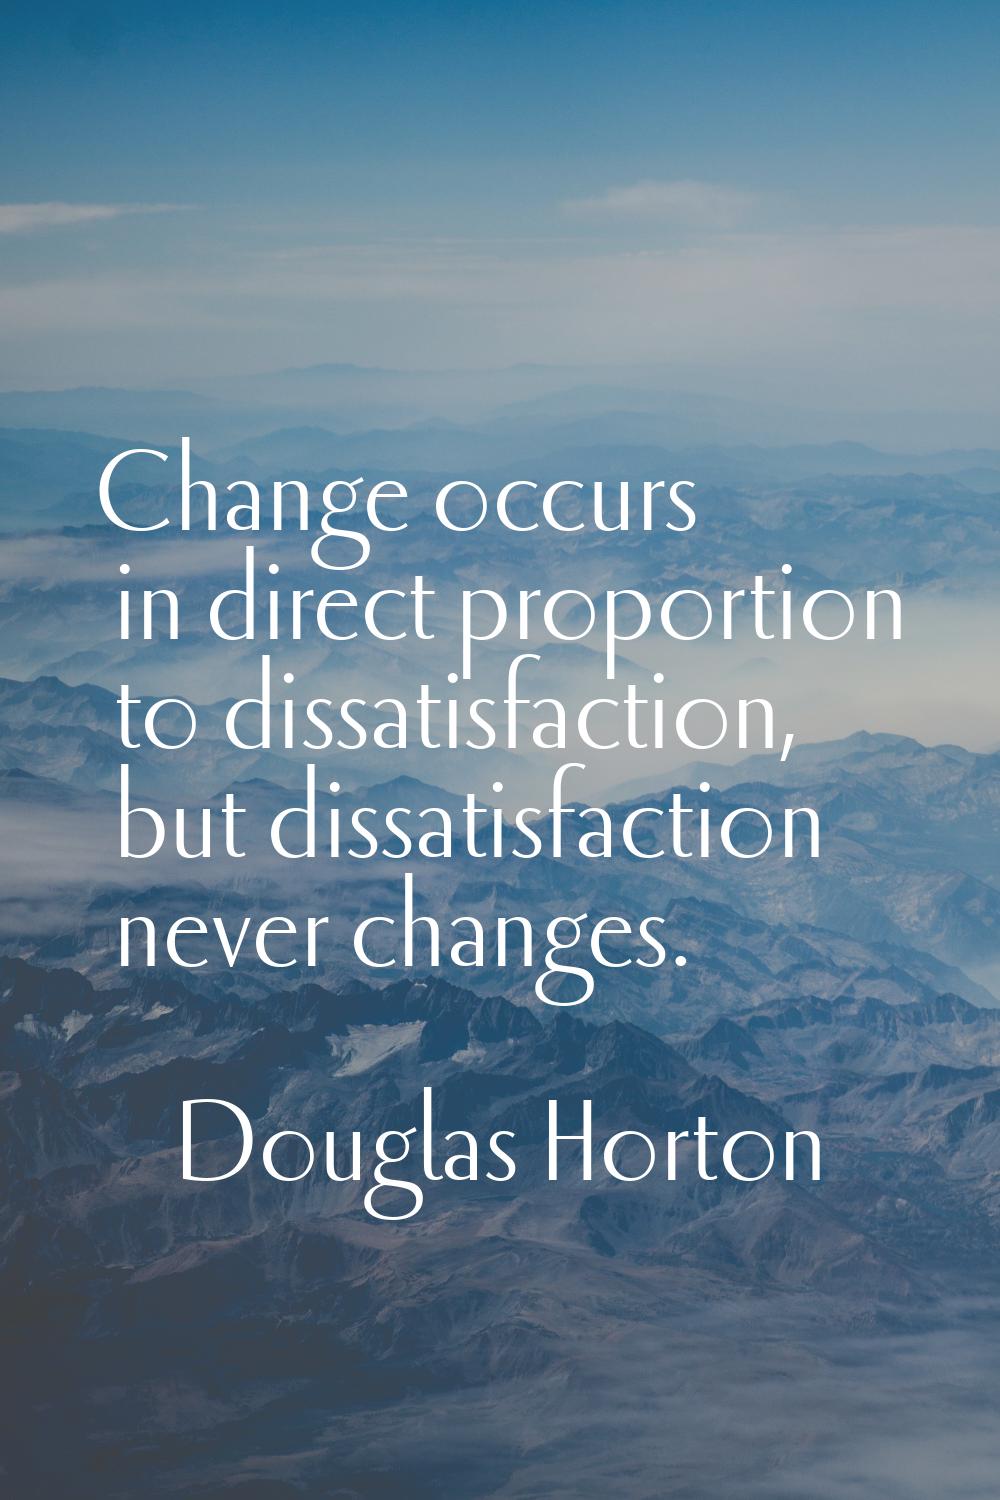 Change occurs in direct proportion to dissatisfaction, but dissatisfaction never changes.